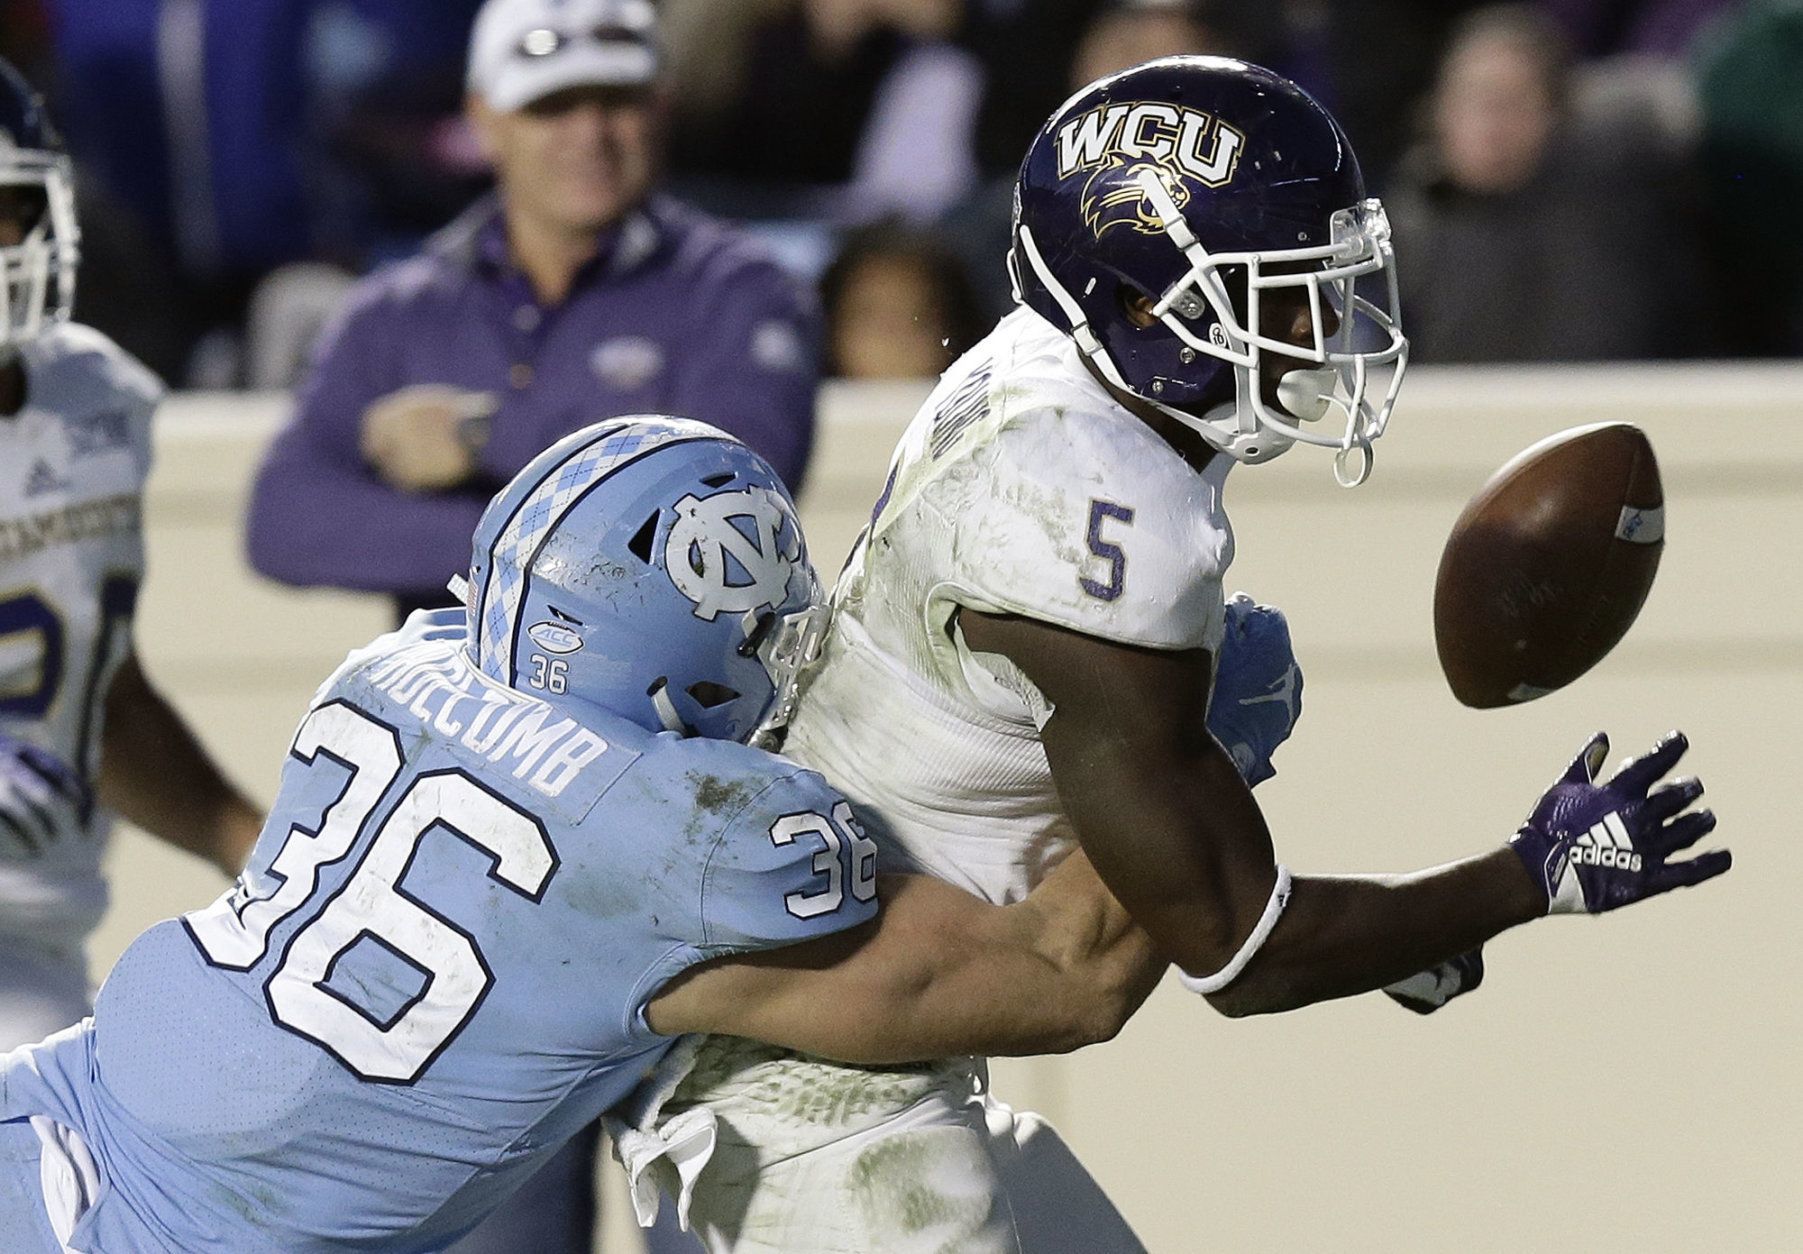 North Carolina's Cole Holcomb (36) hits Western Carolina's Connell Young (5) to cause a fumble during the second half of an NCAA college football game in Chapel Hill, N.C., Saturday, Nov. 17, 2018. North Carolina won 49-26. (AP Photo/Gerry Broome)